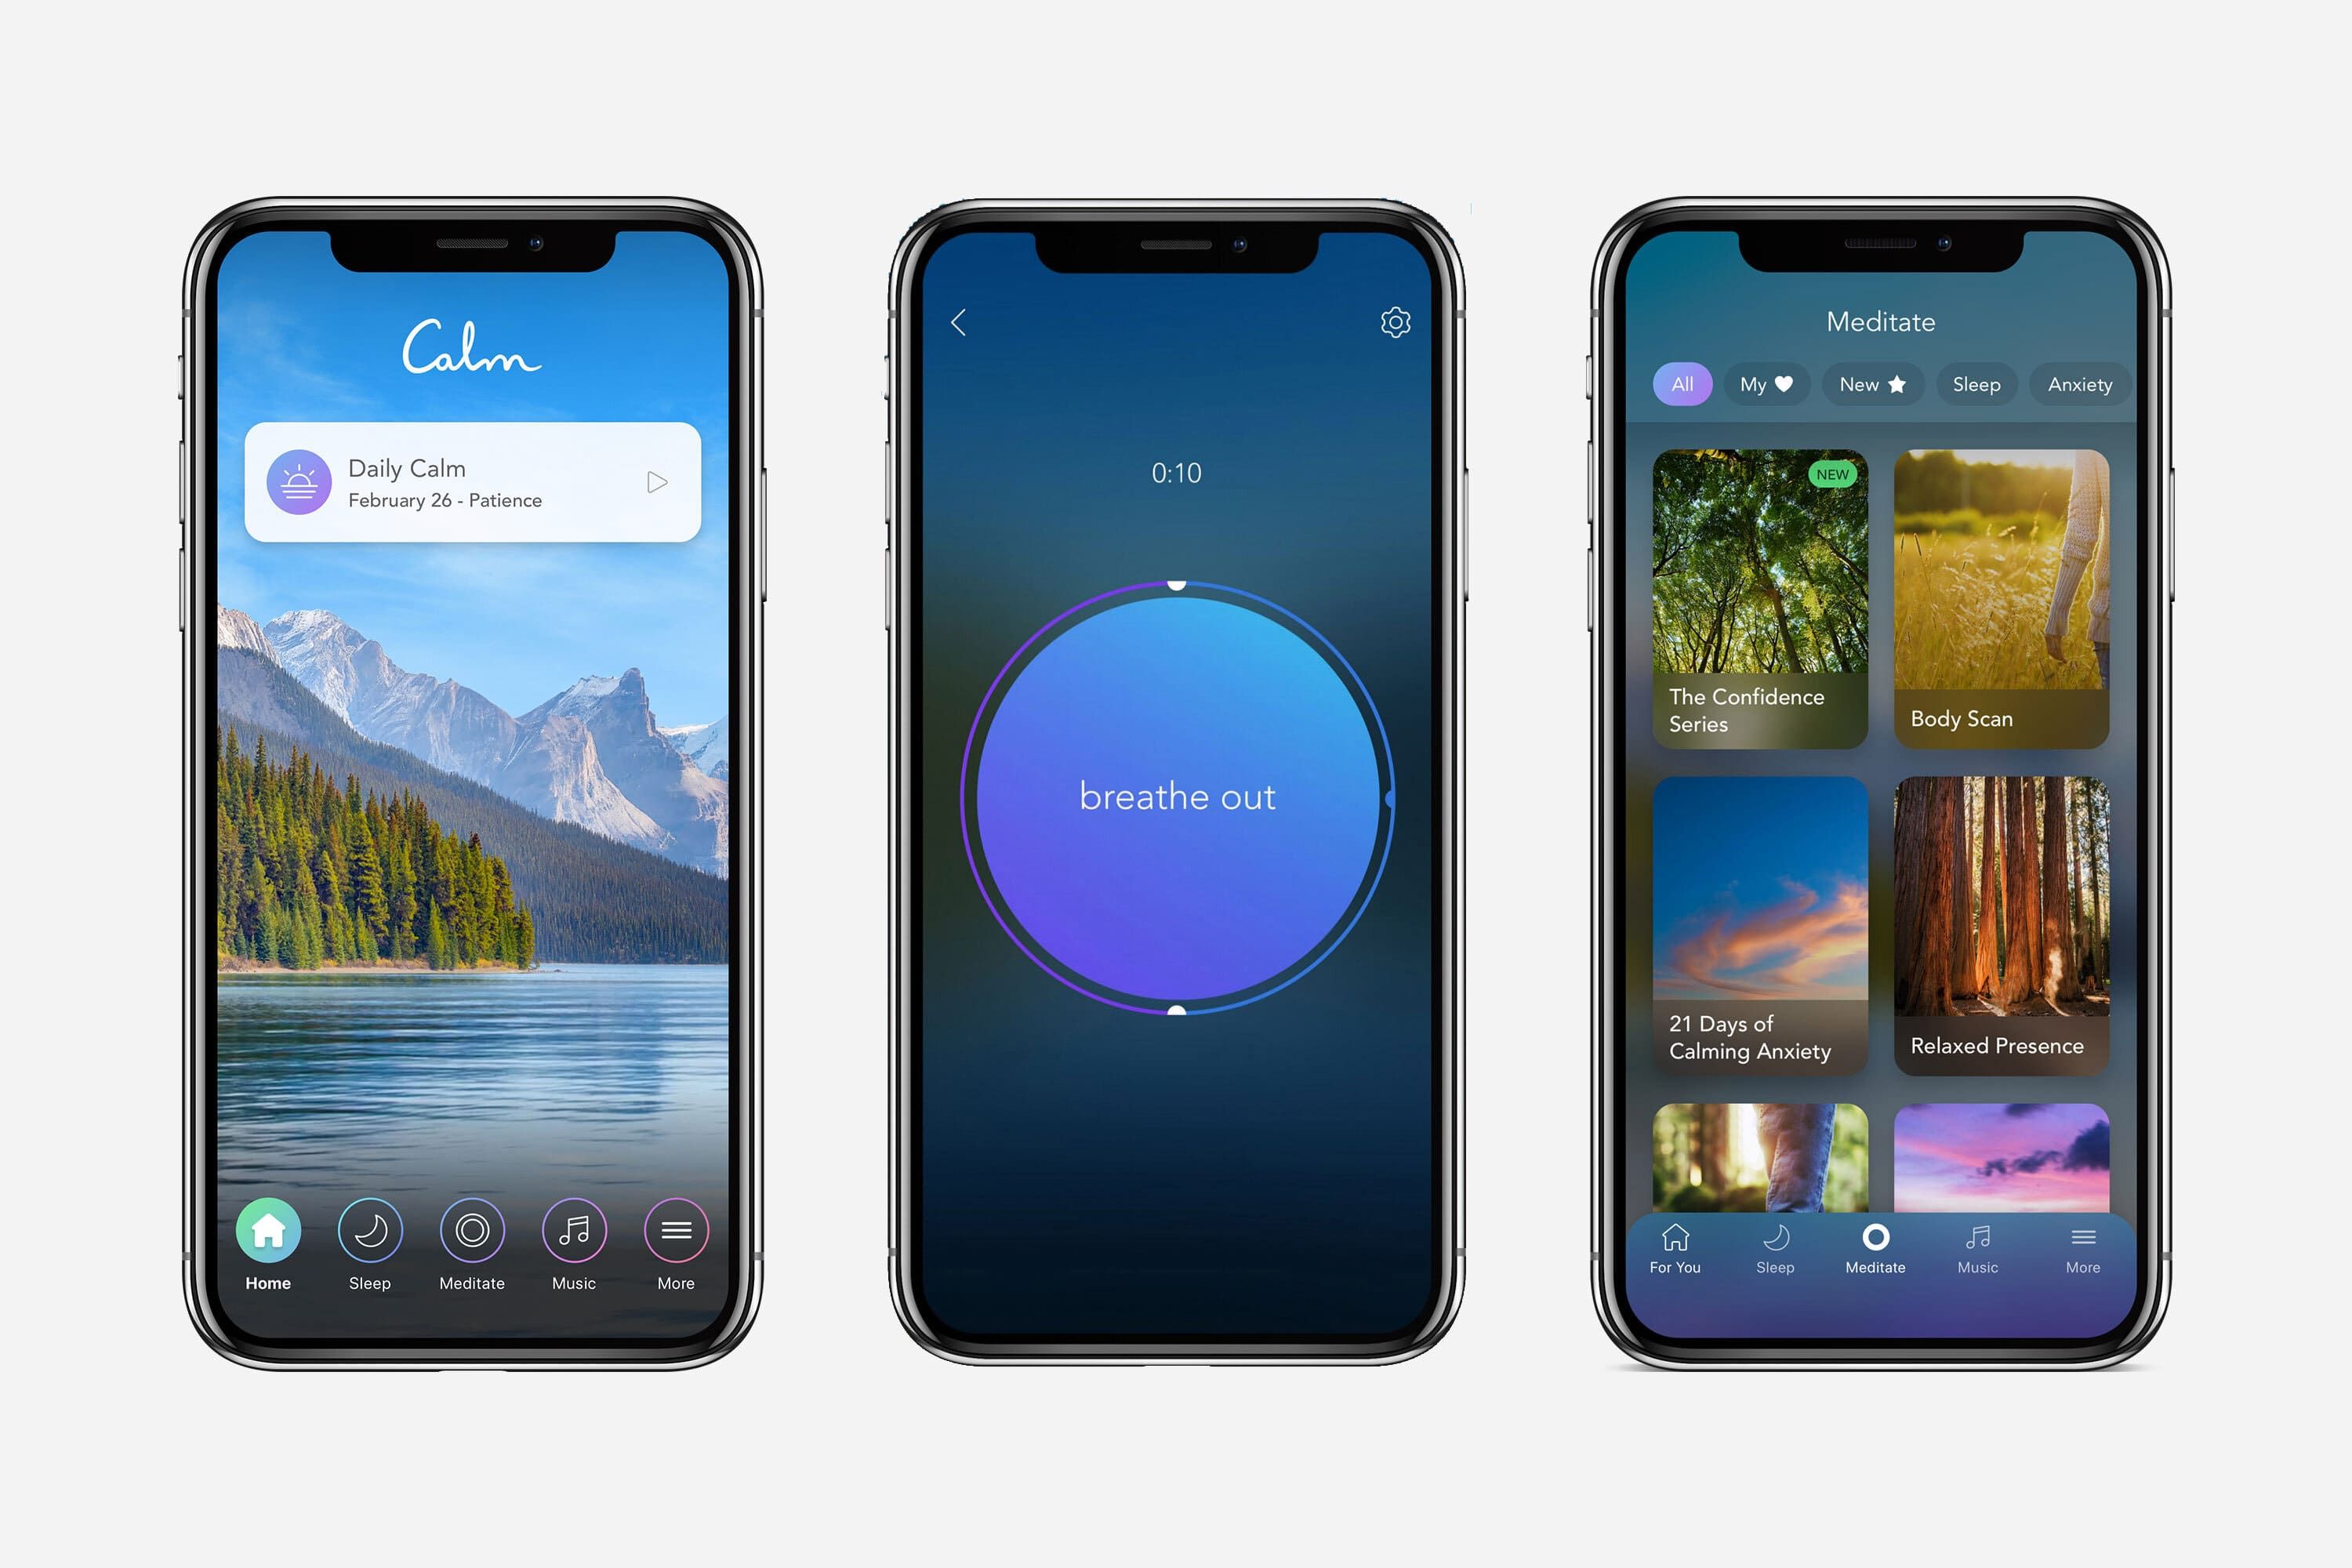 A Calm meditation app has a lot of guided meditations, self care practices, nature sounds, and mental health guided sessions (*image by [InsideHook](https://www.insidehook.com/article/news-opinion/calm-app-cnn-election-coverage){ rel="nofollow" target="_blank" .default-md}*)